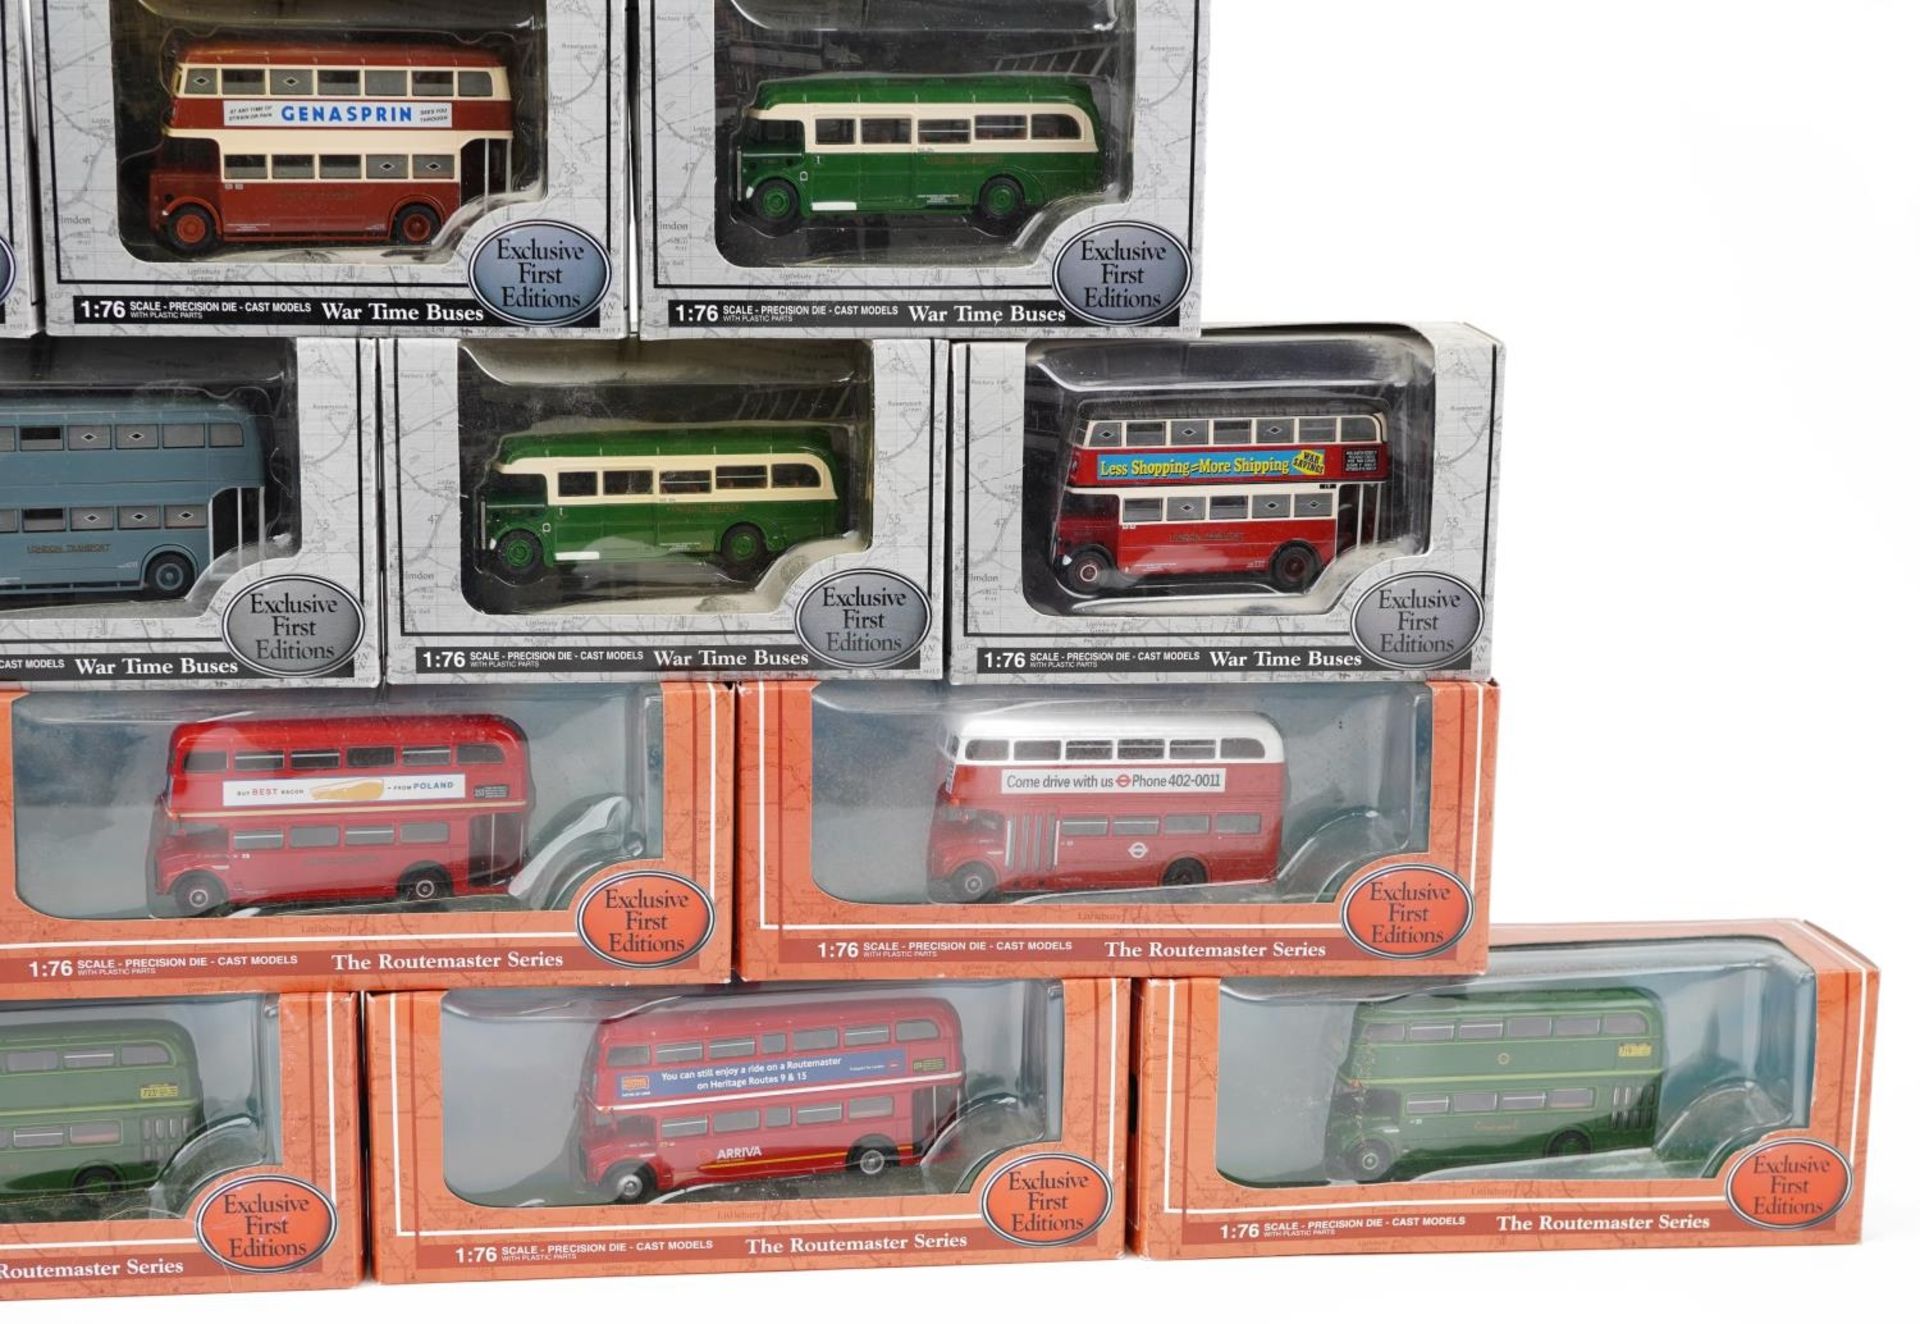 Sixteen Exclusive First Editions 1:76 scale diecast model buses with boxes from The Wartime Buses - Bild 4 aus 4